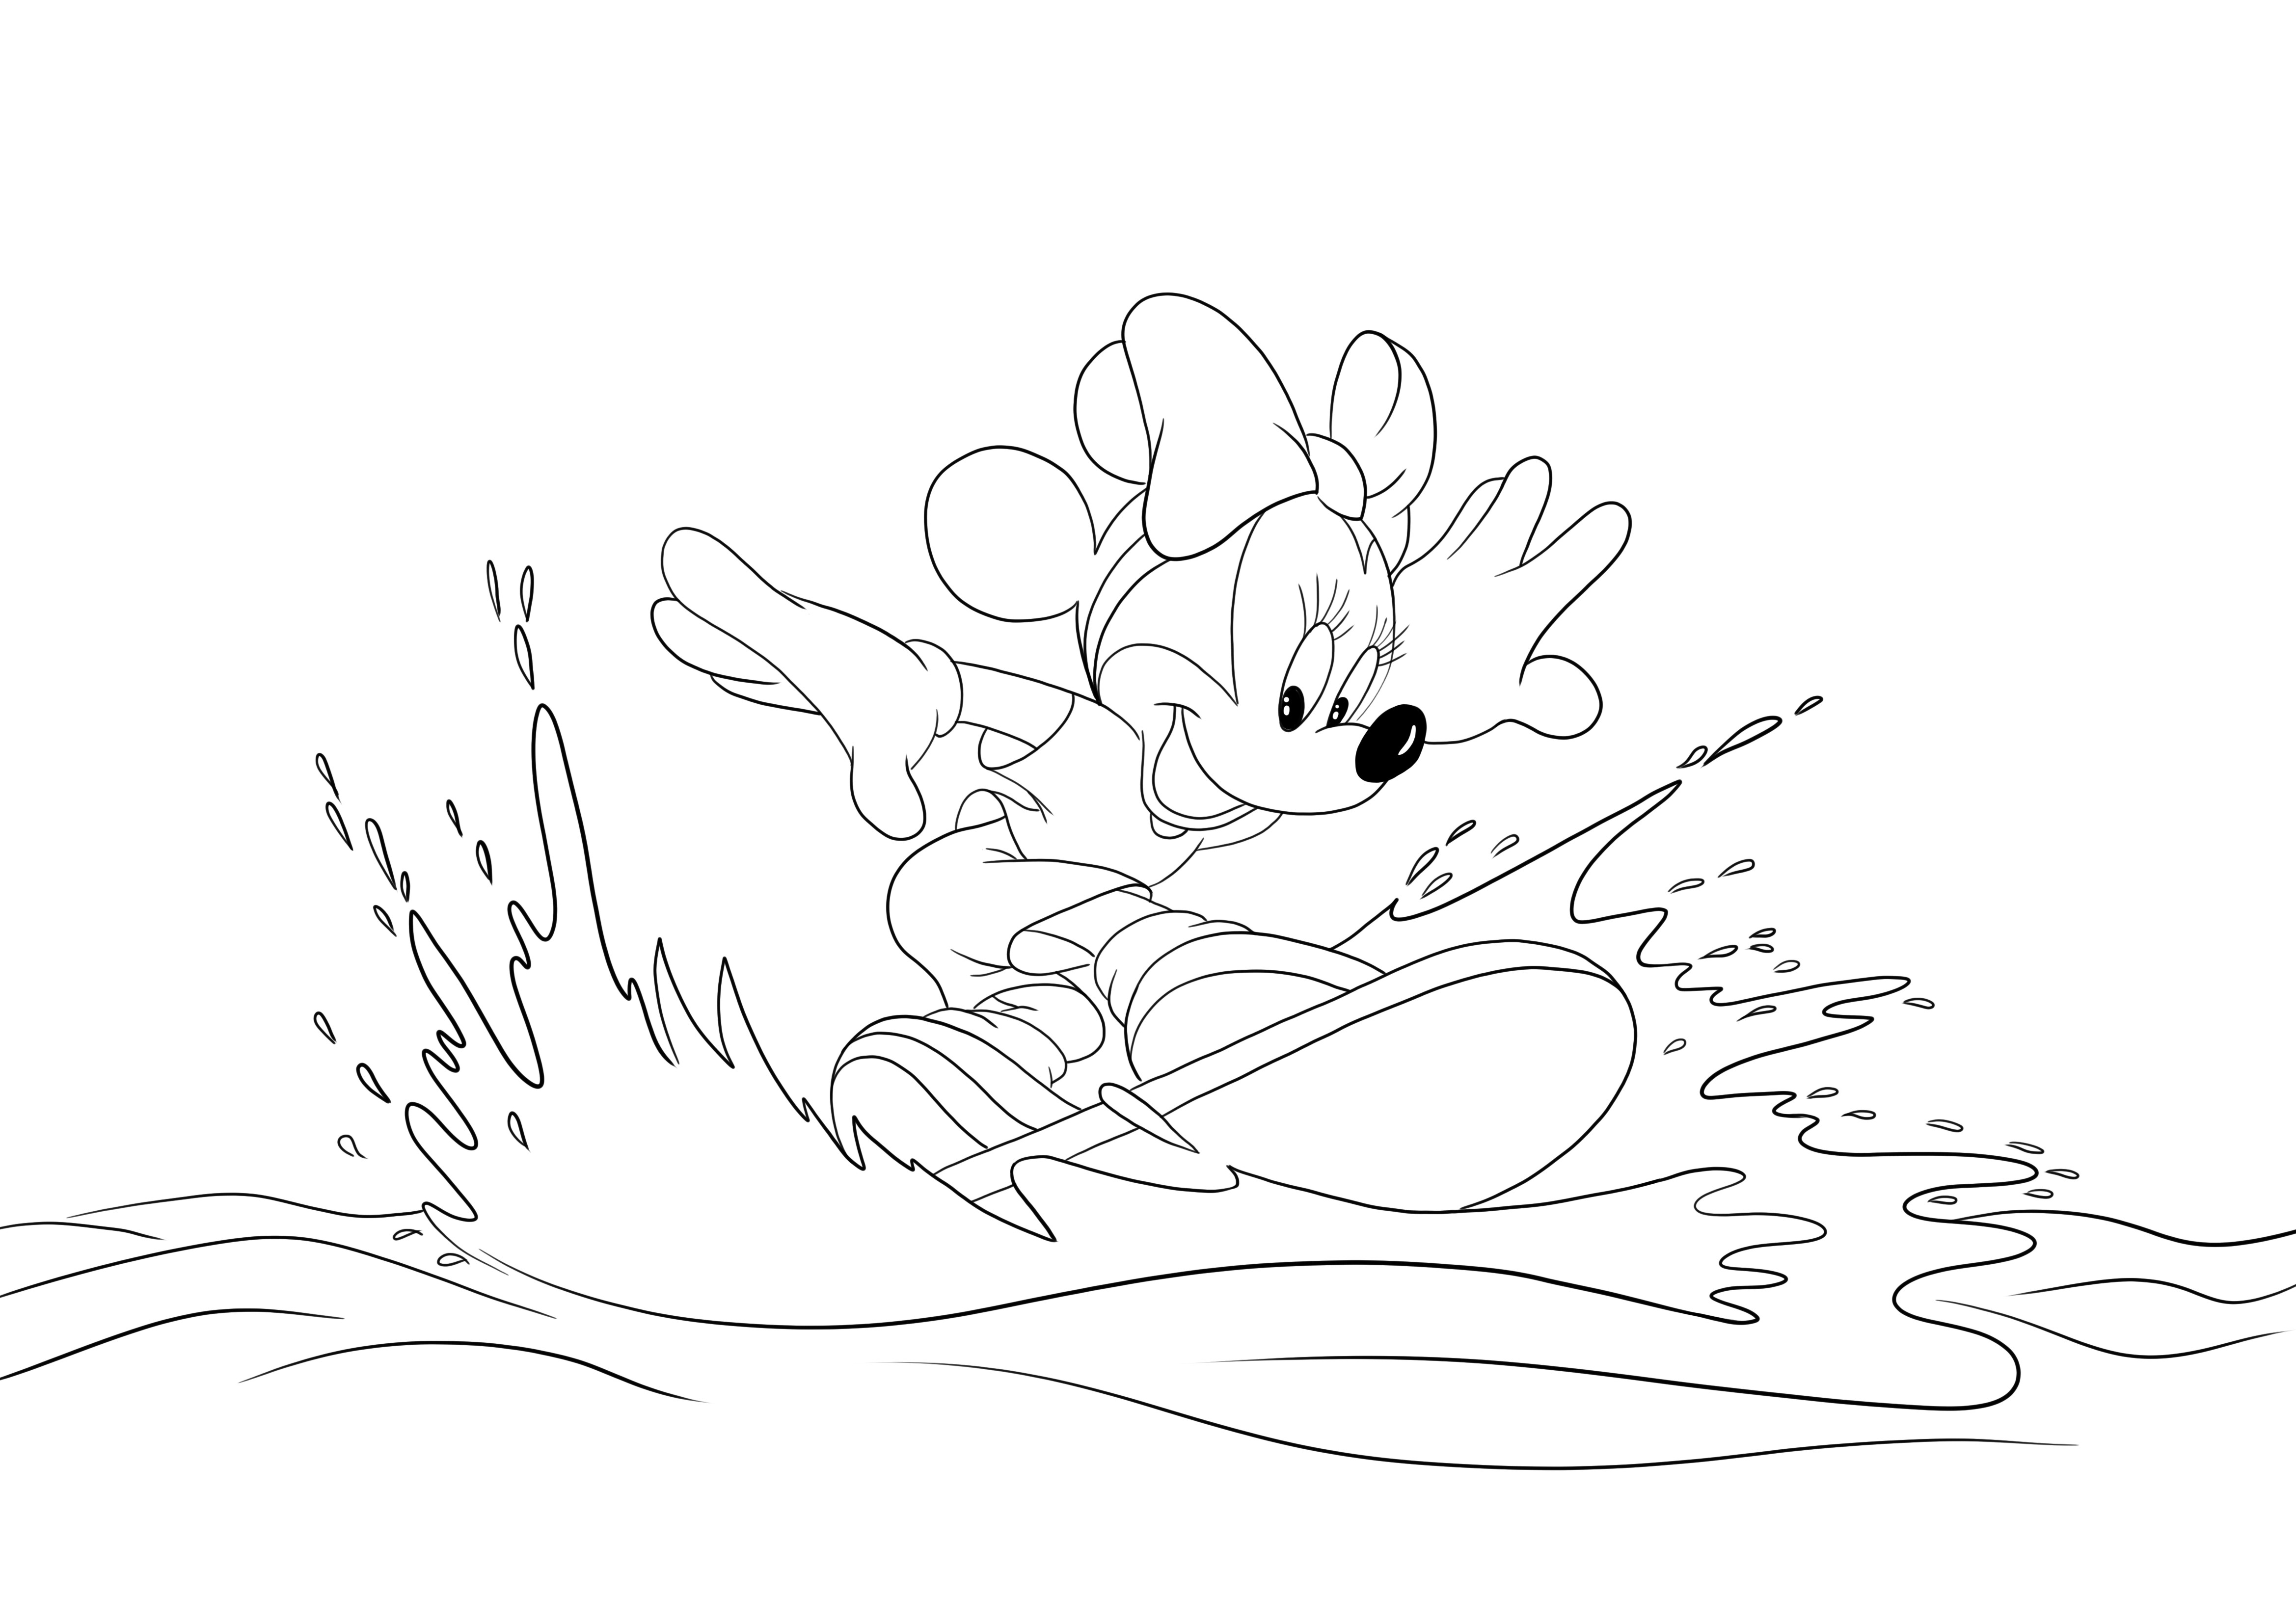 A great coloring image of Minnie surfing in the ocean for free downloading